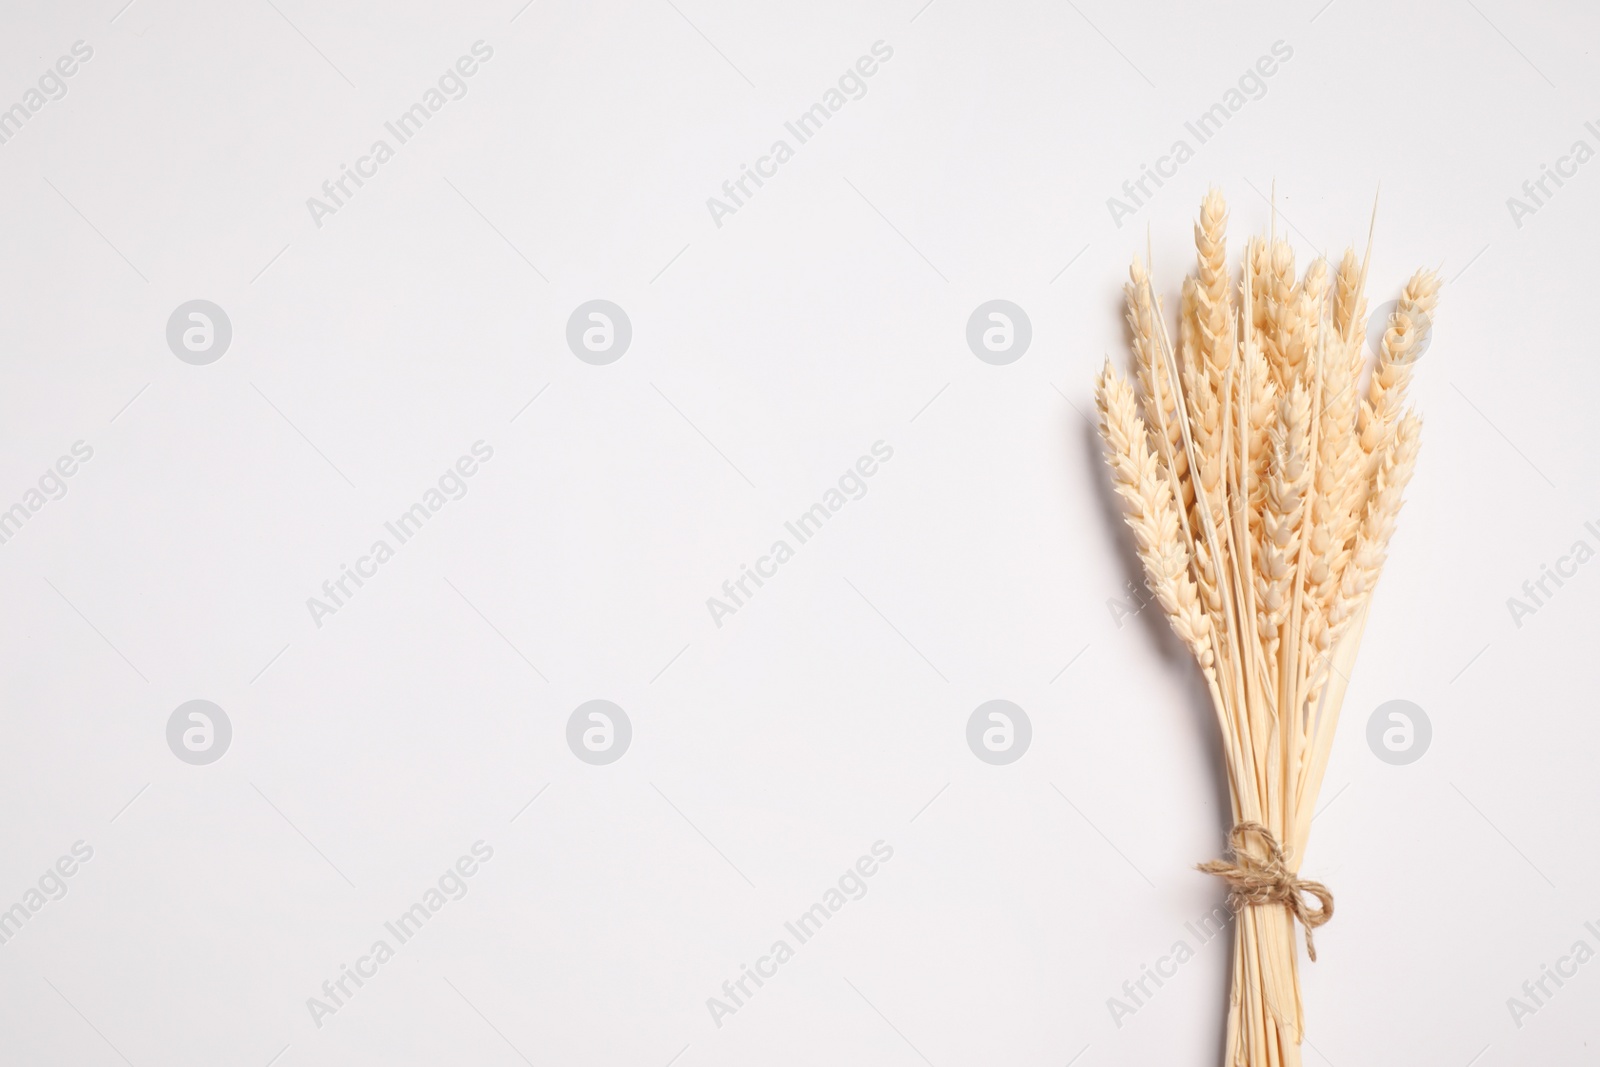 Photo of Bunch of beautiful dried flowers on white background, top view